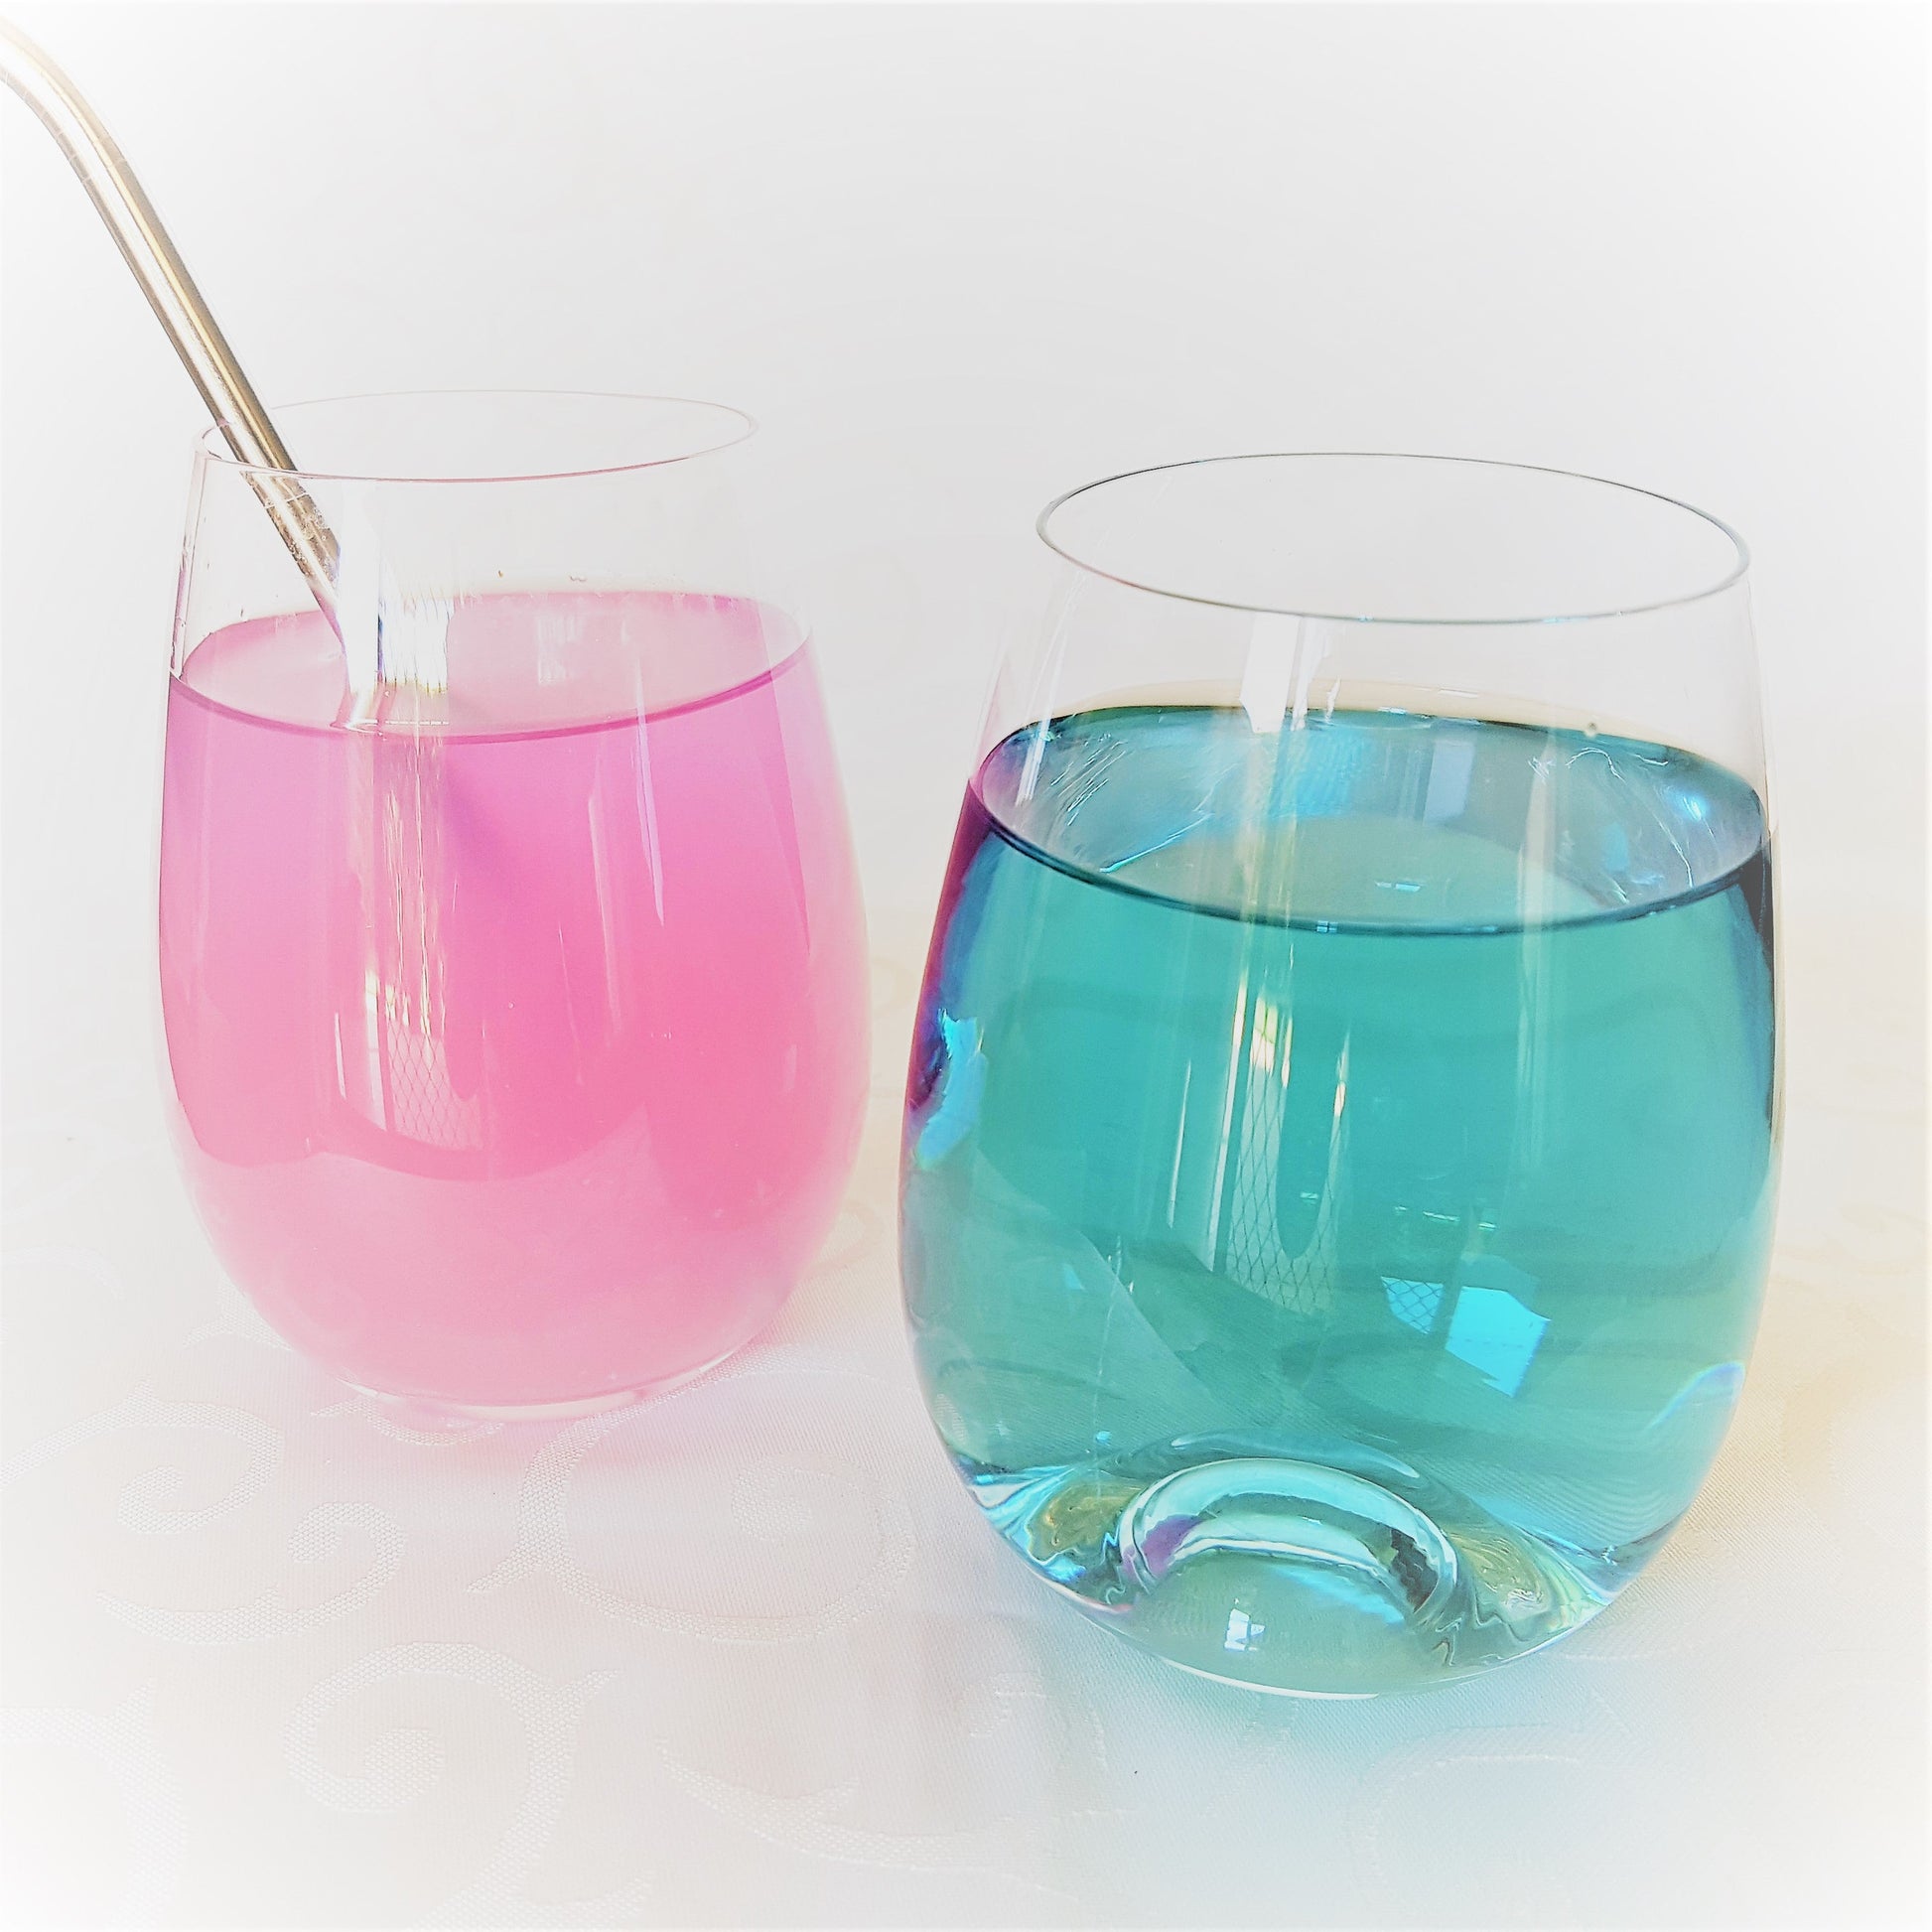 Butterfly pea flower beverages in two glasses. Original colour of tea is blue. Adding a citrus changes it into pink.